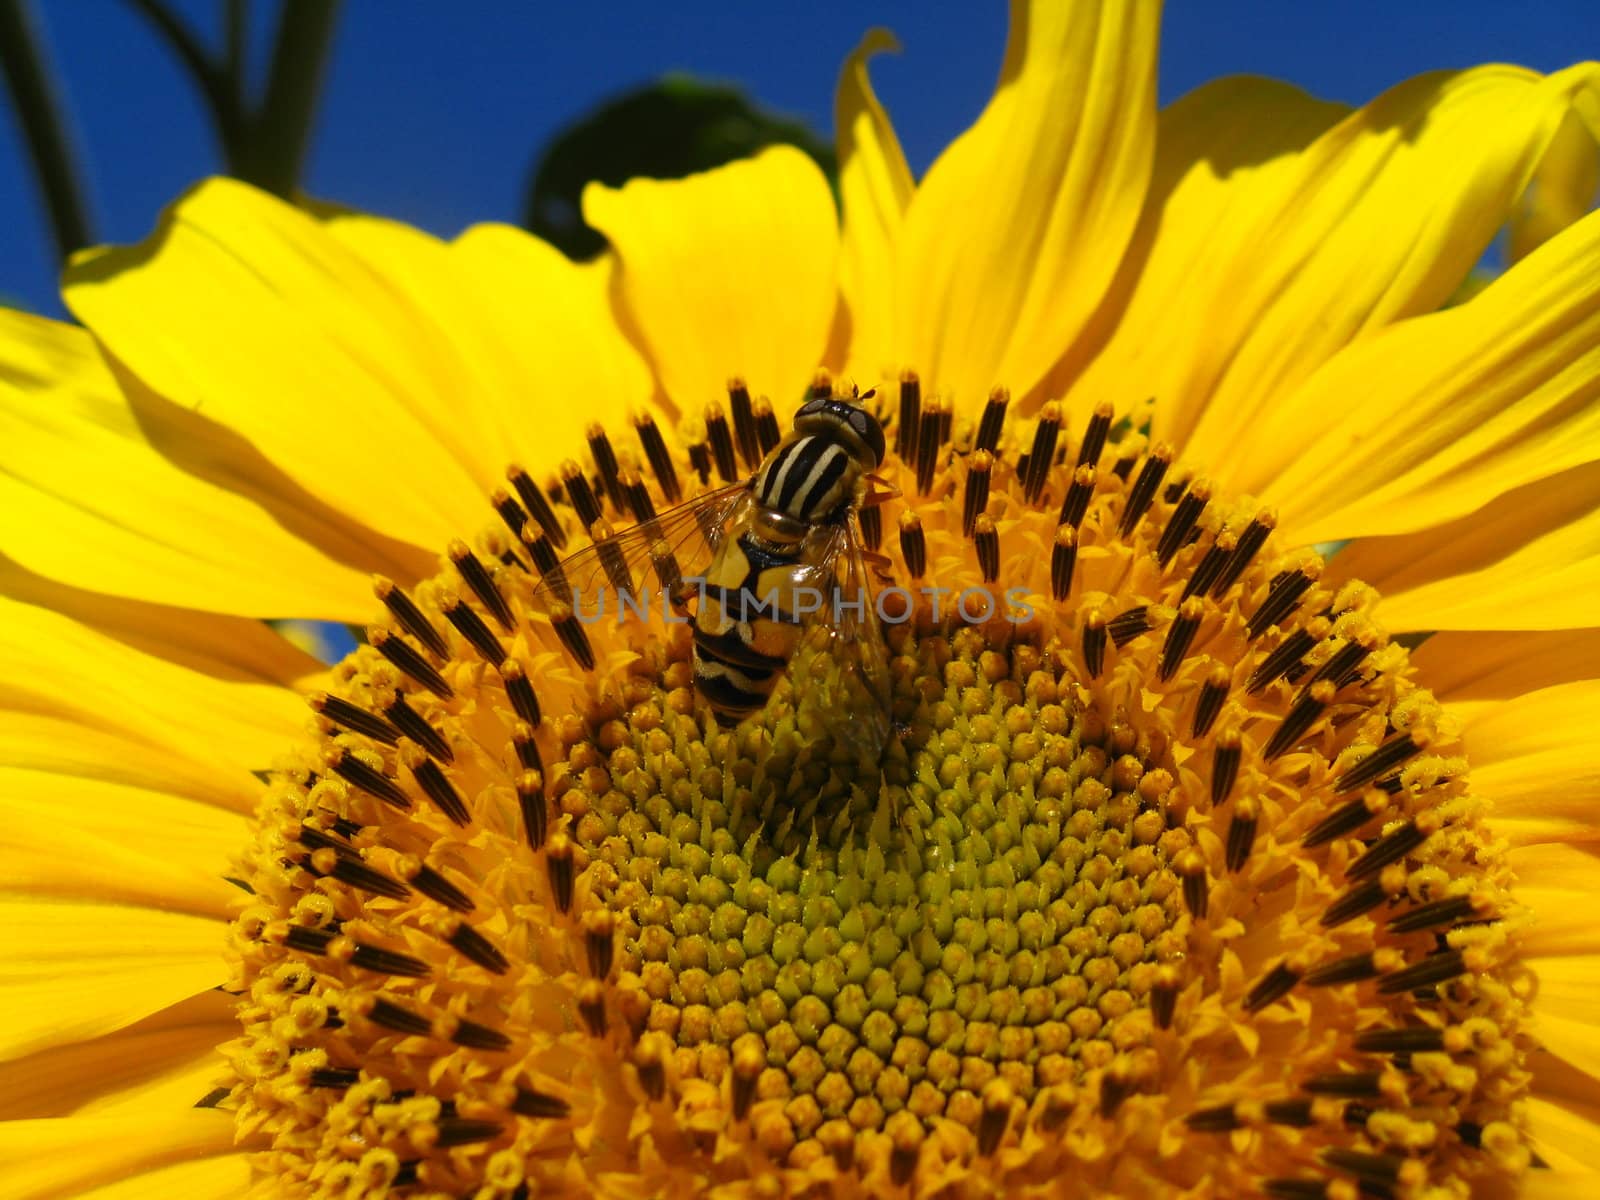 The yellow fly on a sunflower by alexmak